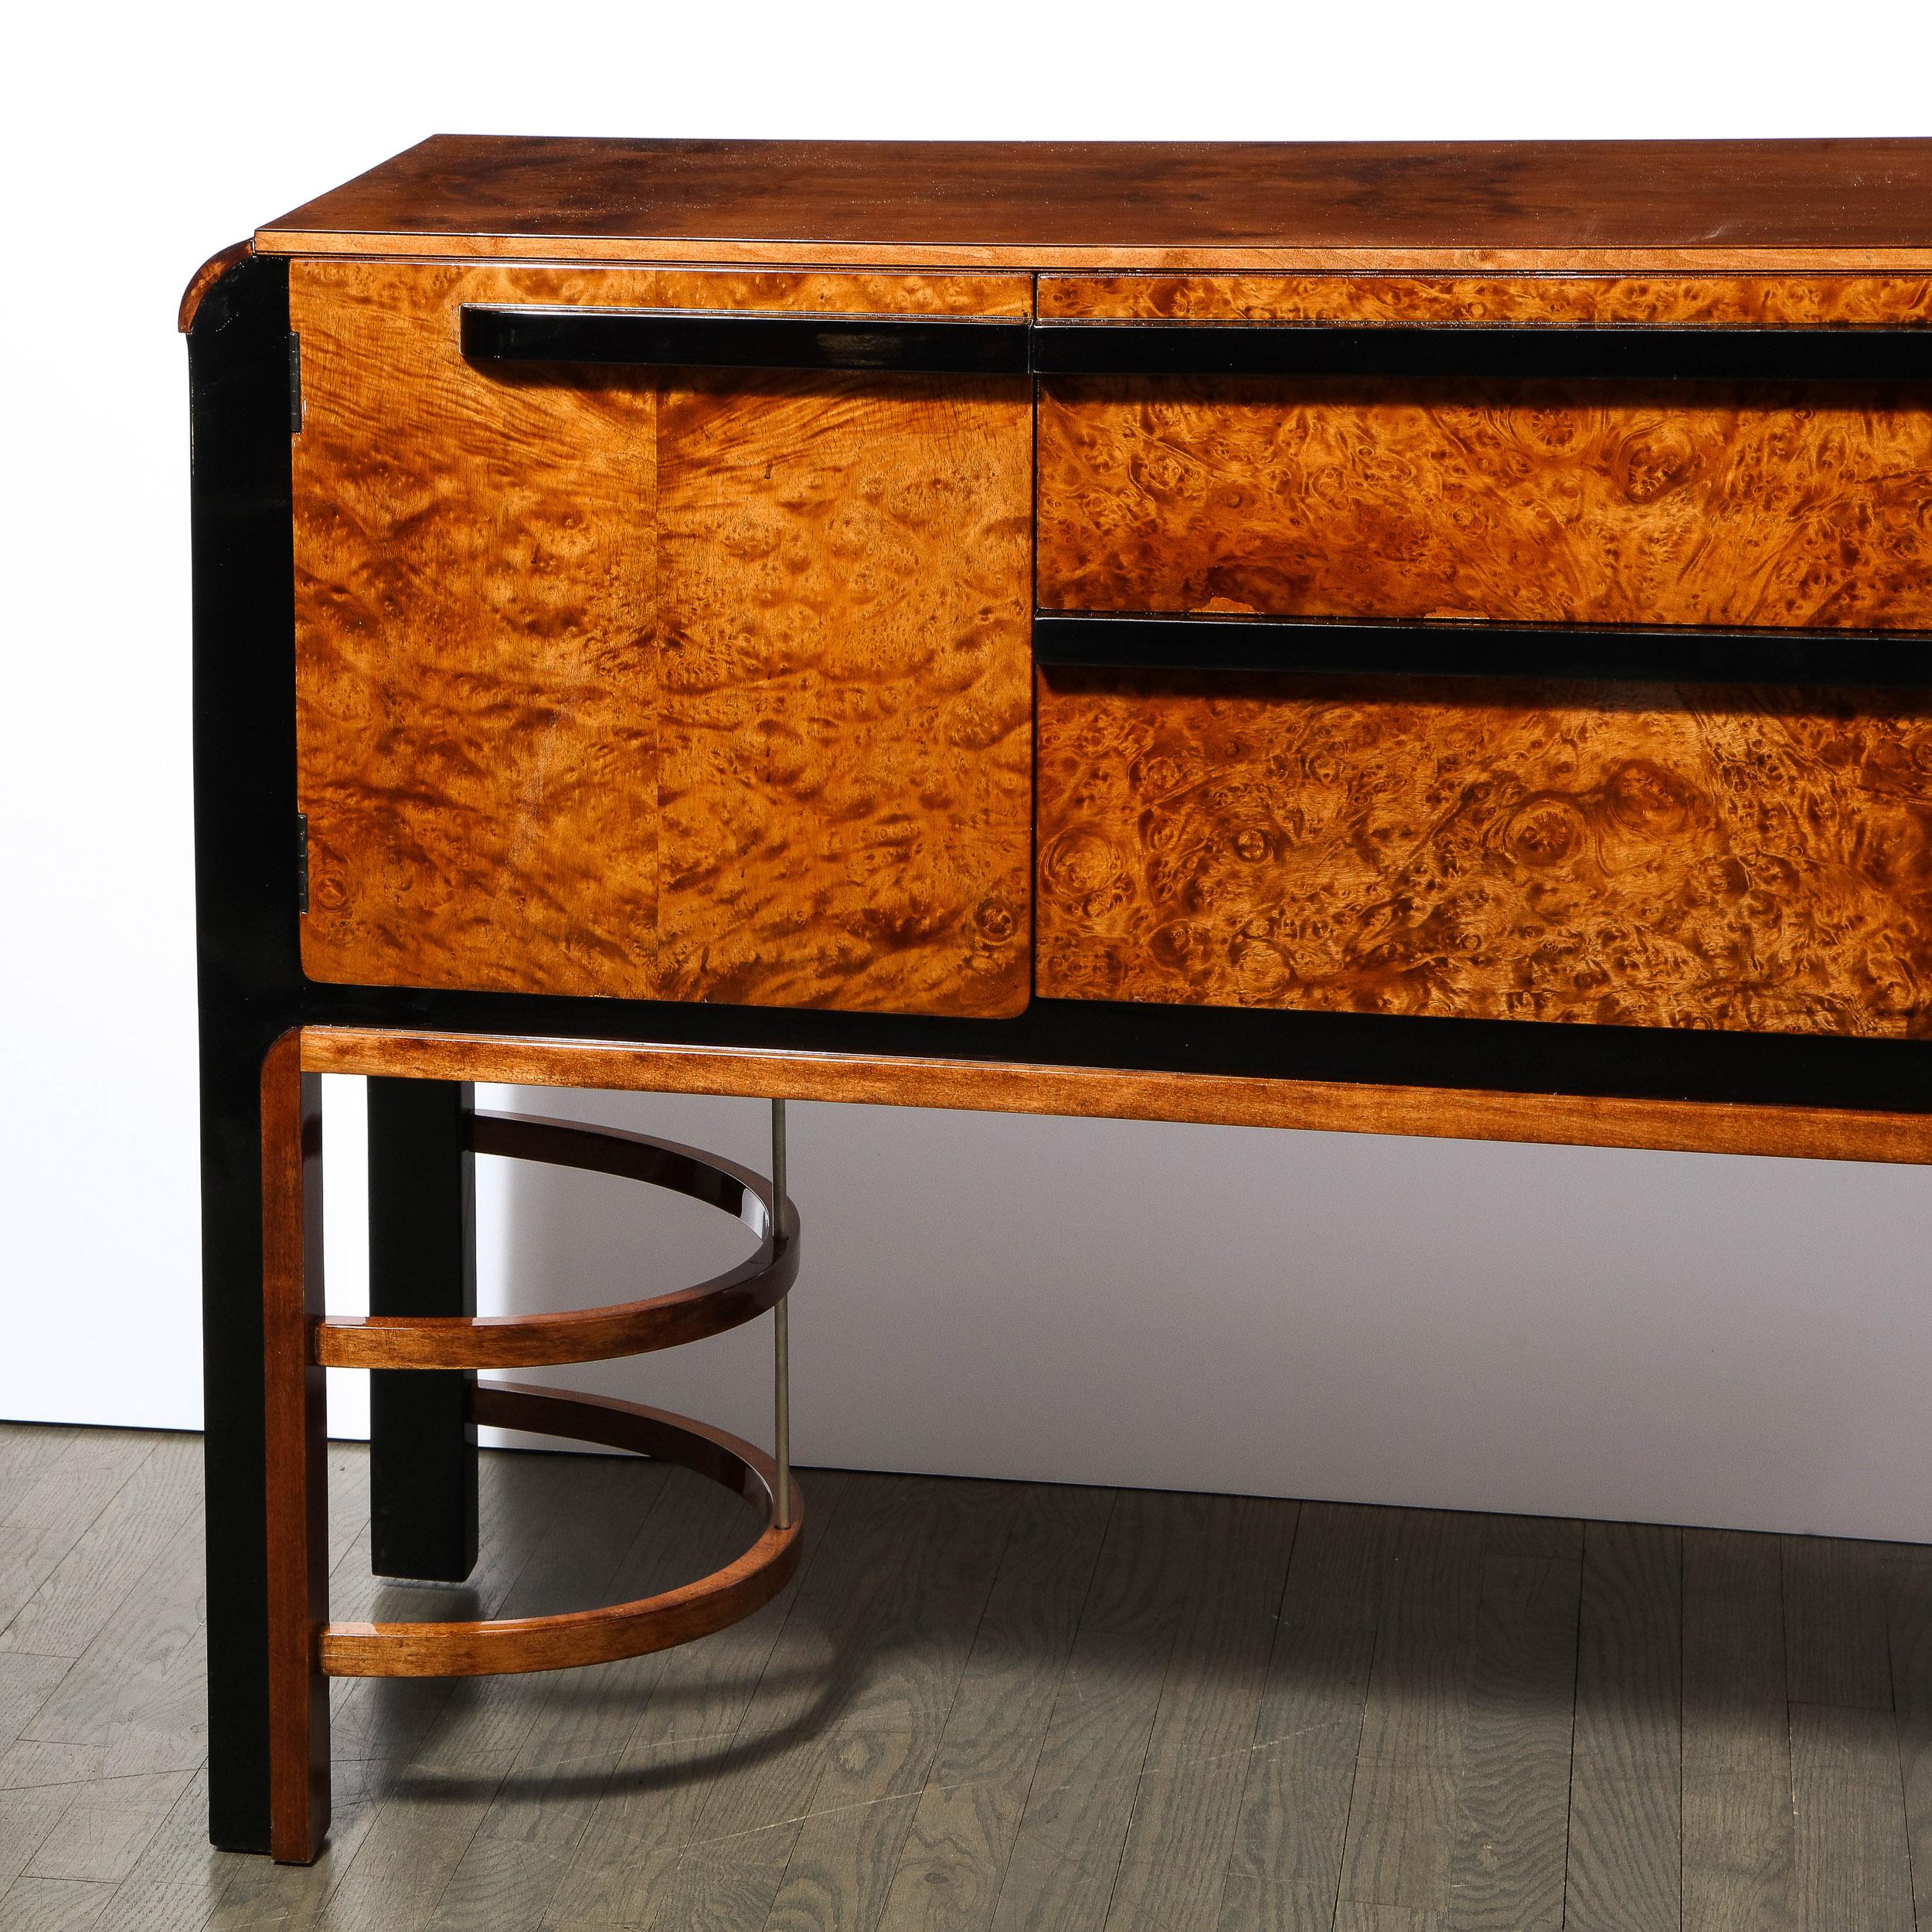 This stunning Art Deco Machine Age sideboard was designed by Donald Deskey (the visionary behind Radio City Music Hall) and realized for the Widdicomb Furniture Company in the United States, circa 1935. It features a burled carpathian elm front with